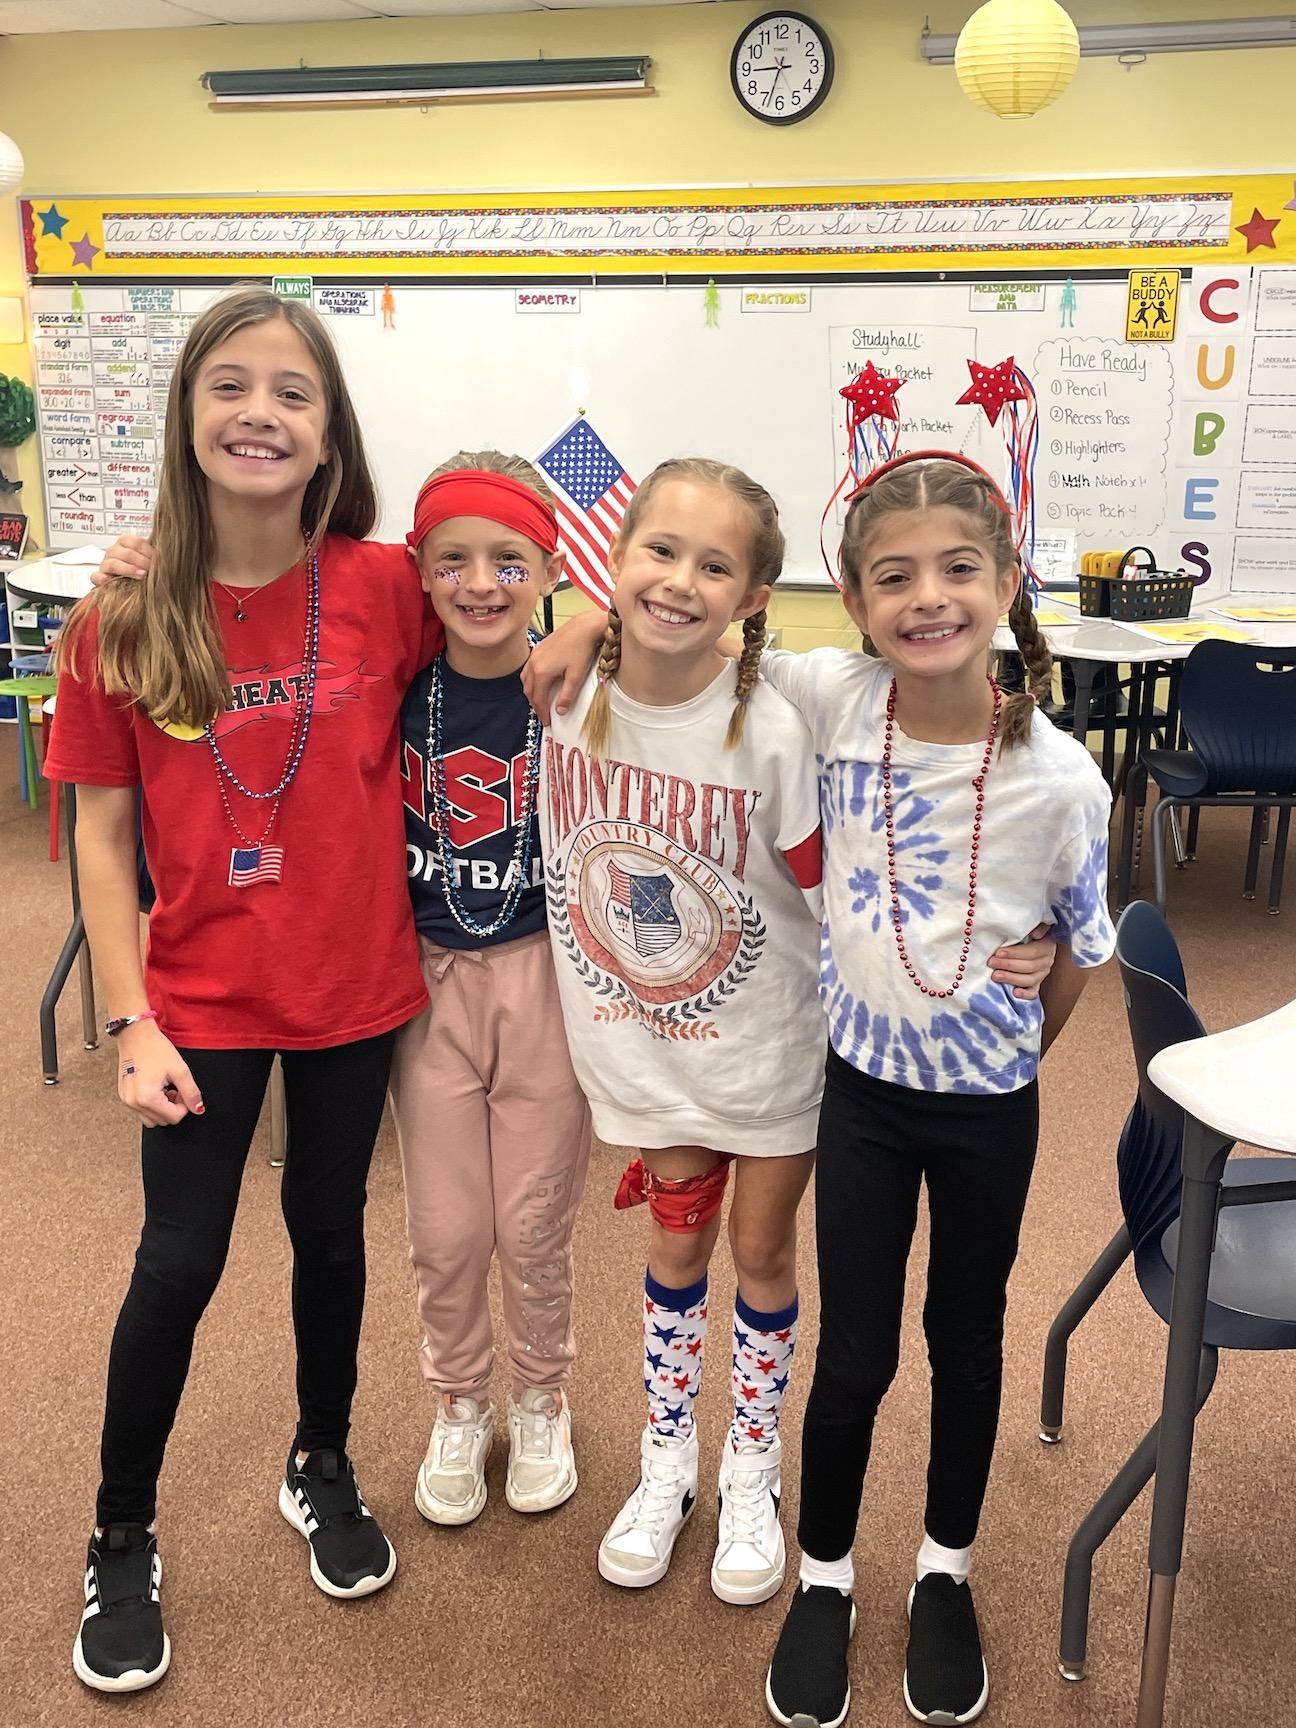 Harrison Park Elementary students Kendall Scavincky, Nina Padezan, Capriana Caruso, and Willow Scavincky ‘cast their vote to be Drug-Free’ by dressing in red, white, and blue on Tuesday